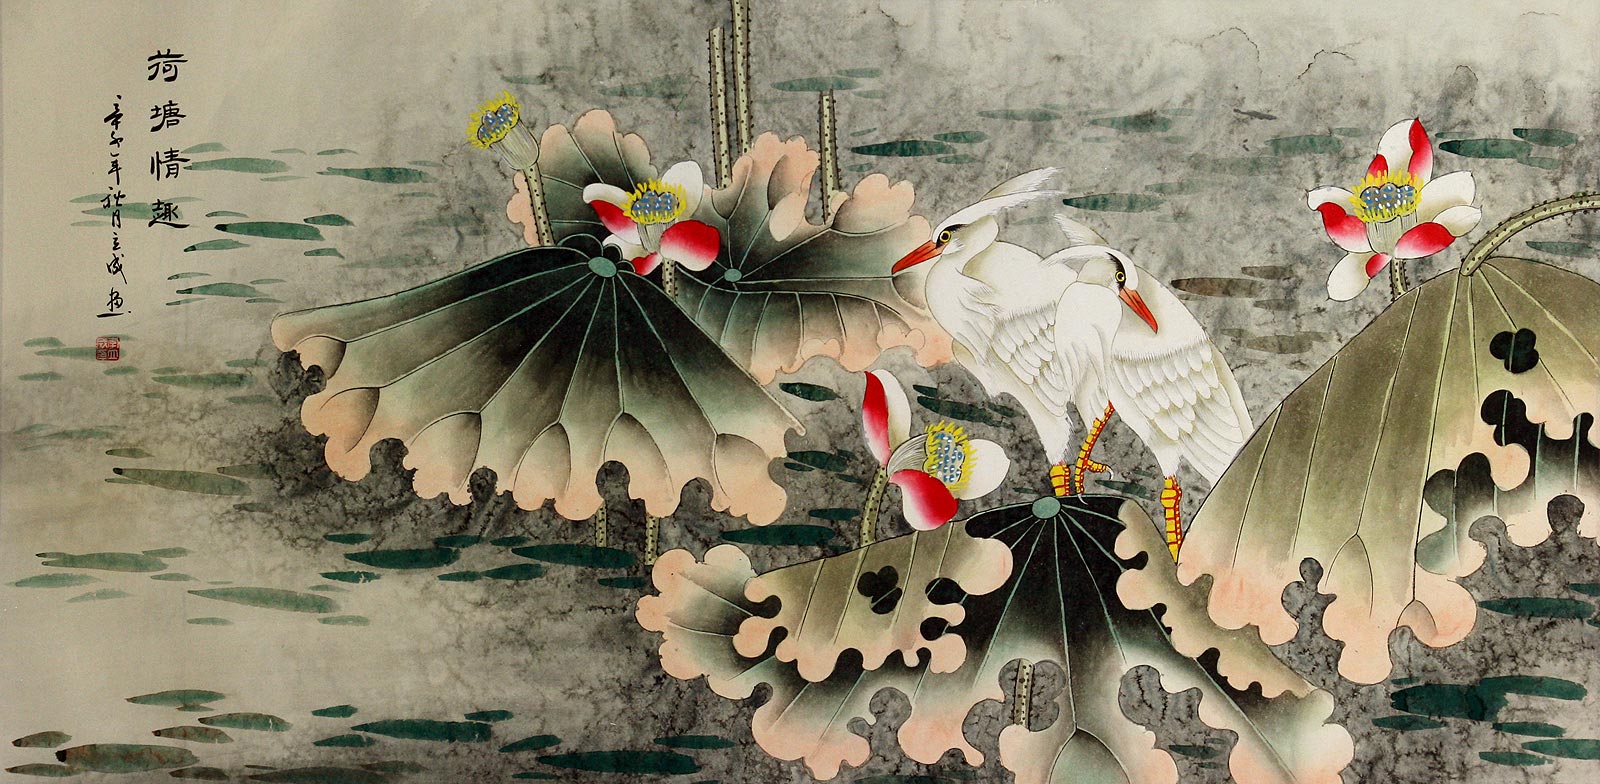 Sentimental Egrets in the Lotus Pond - Large Painting